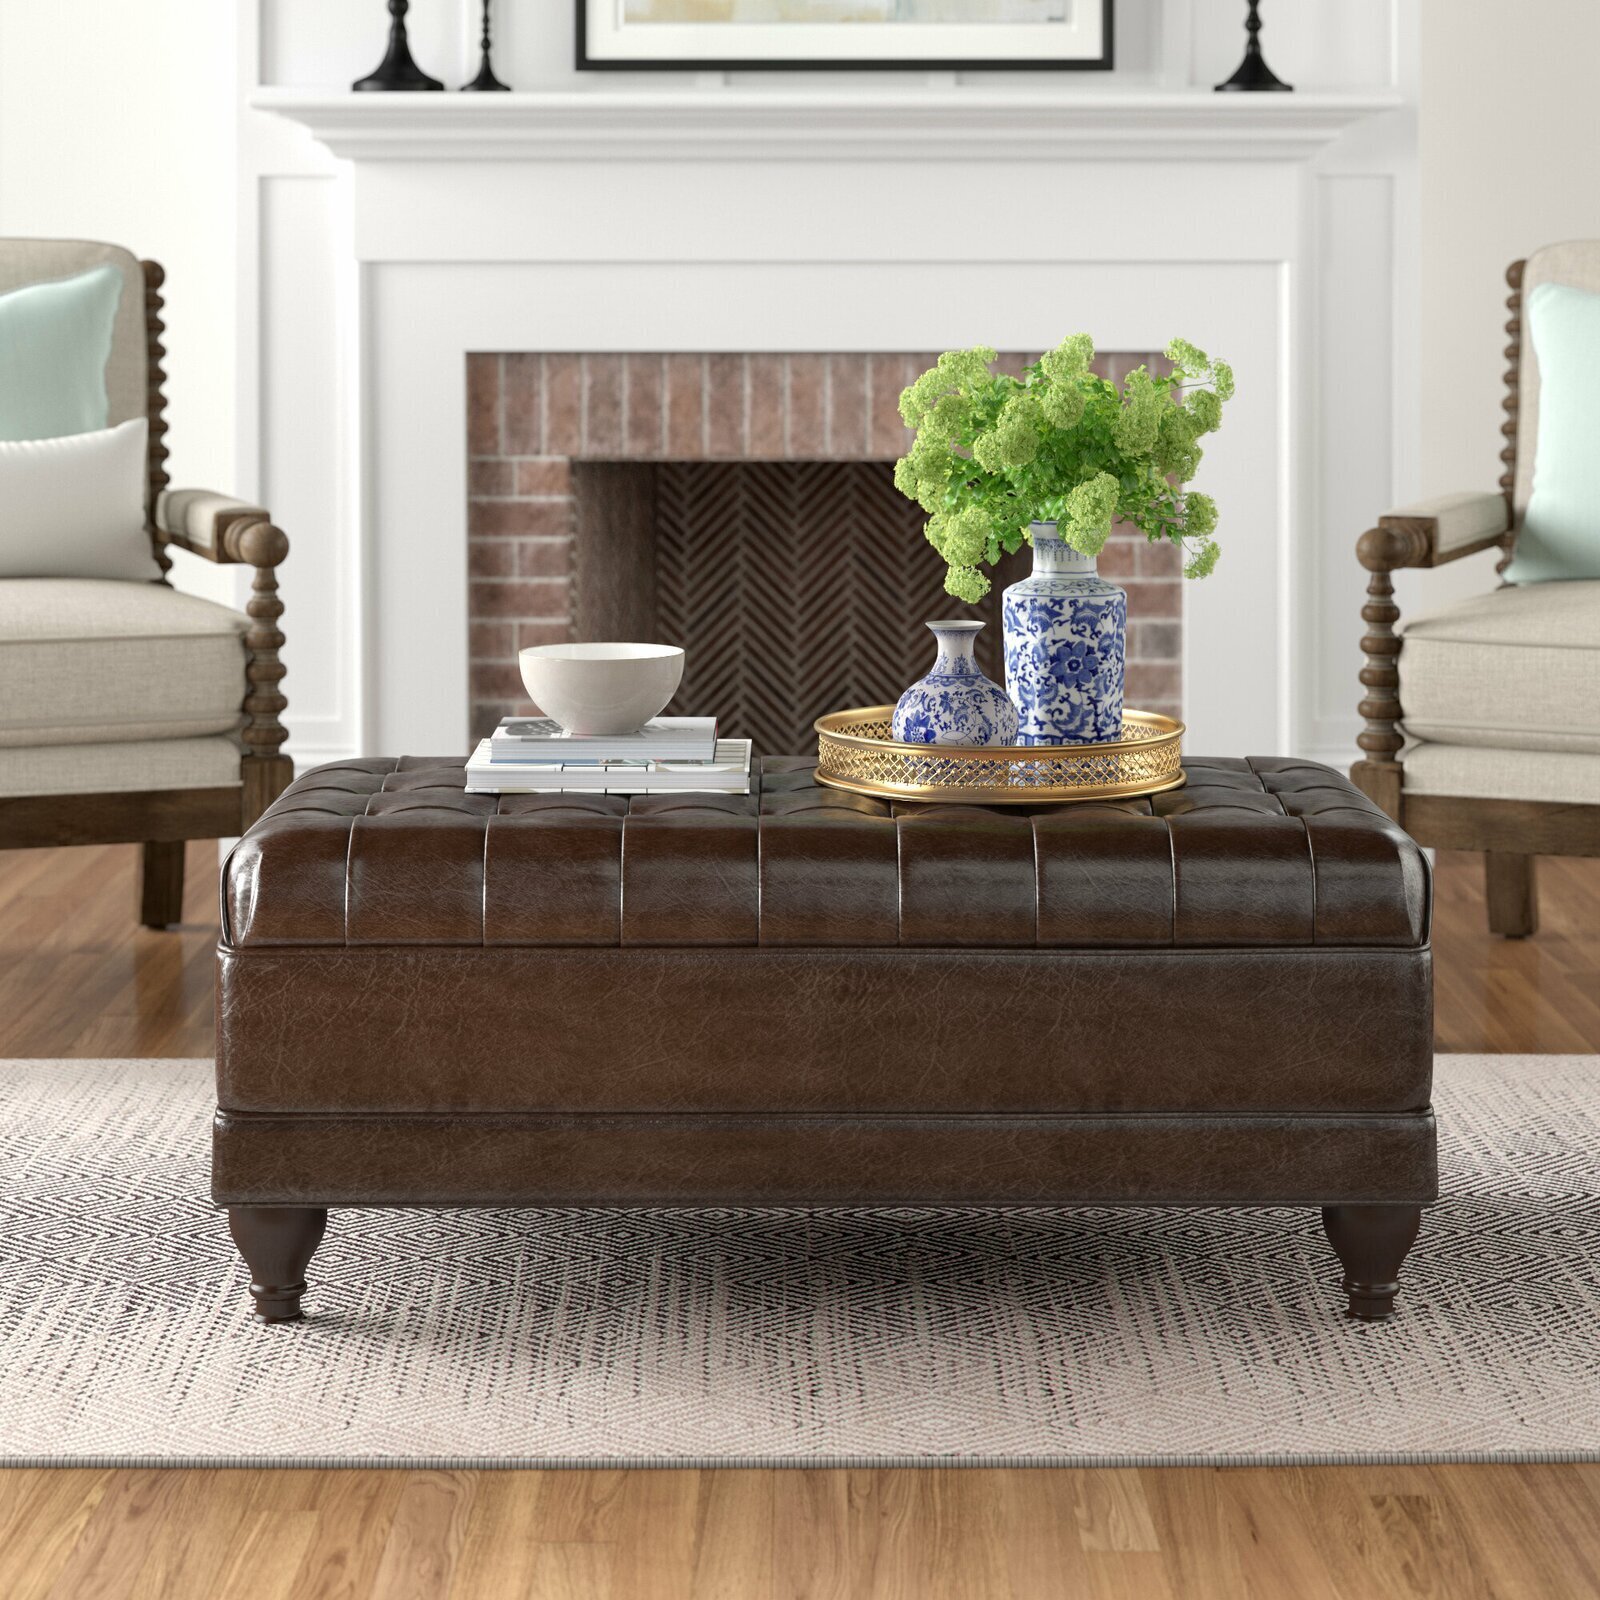 Tufted Leather Coffee Table with Storage